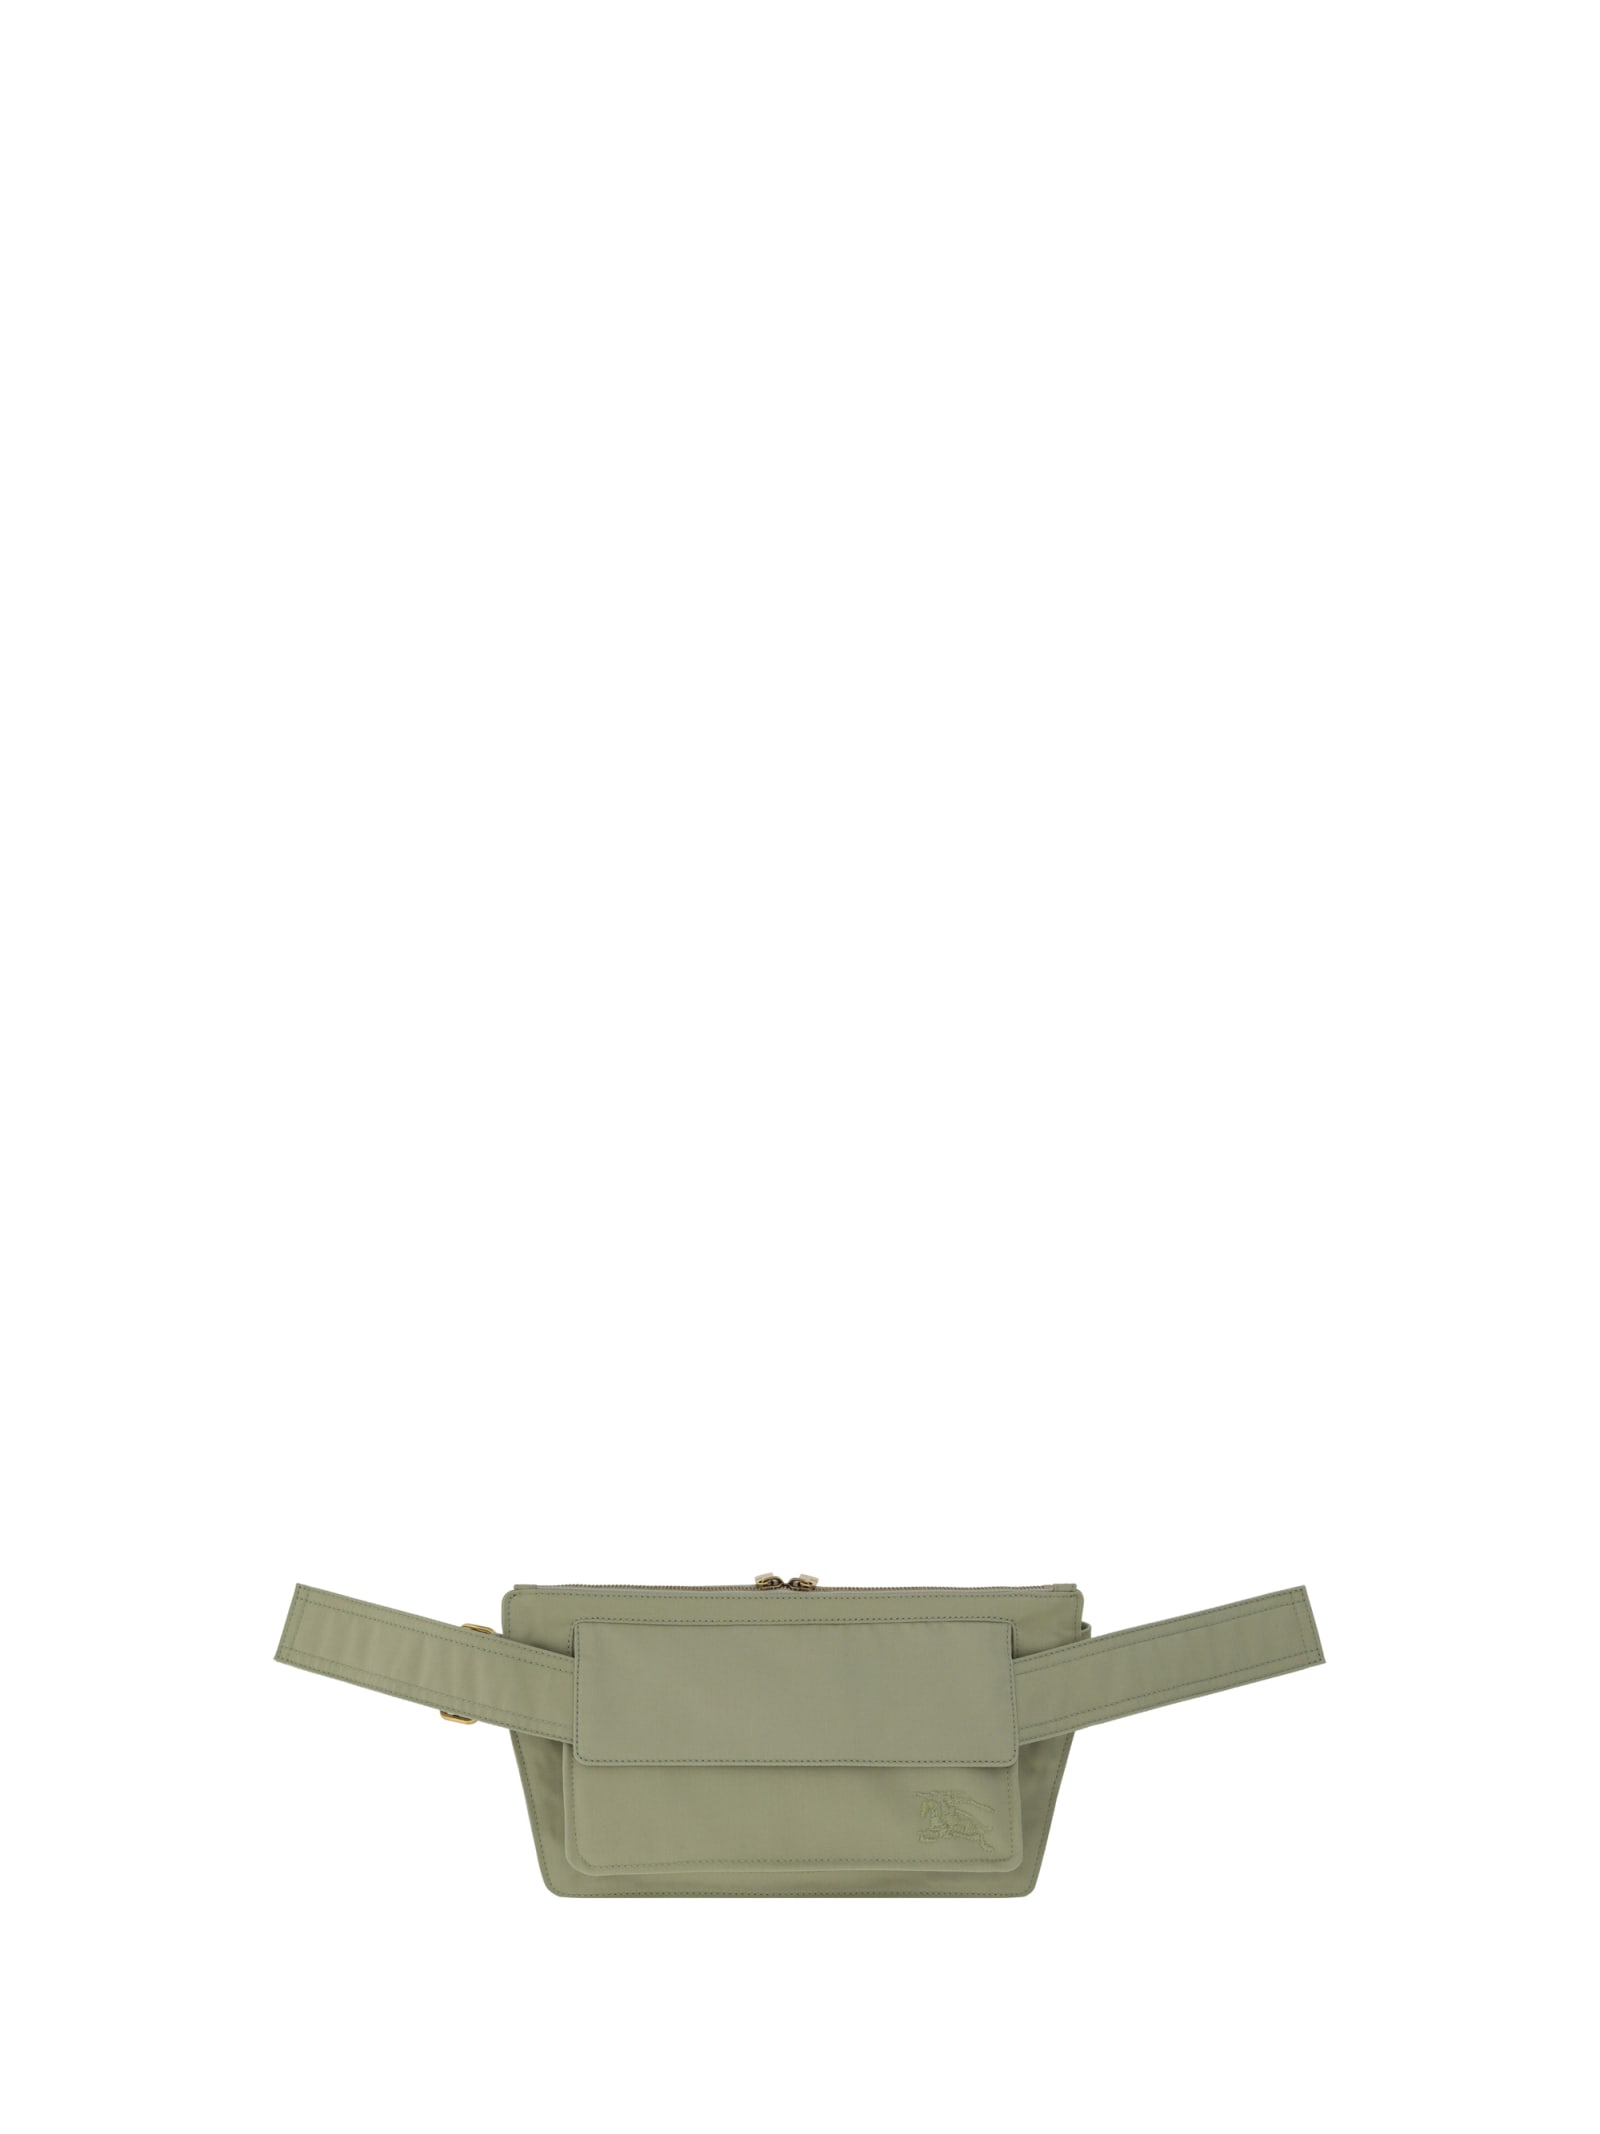 Trench Fanny Pack